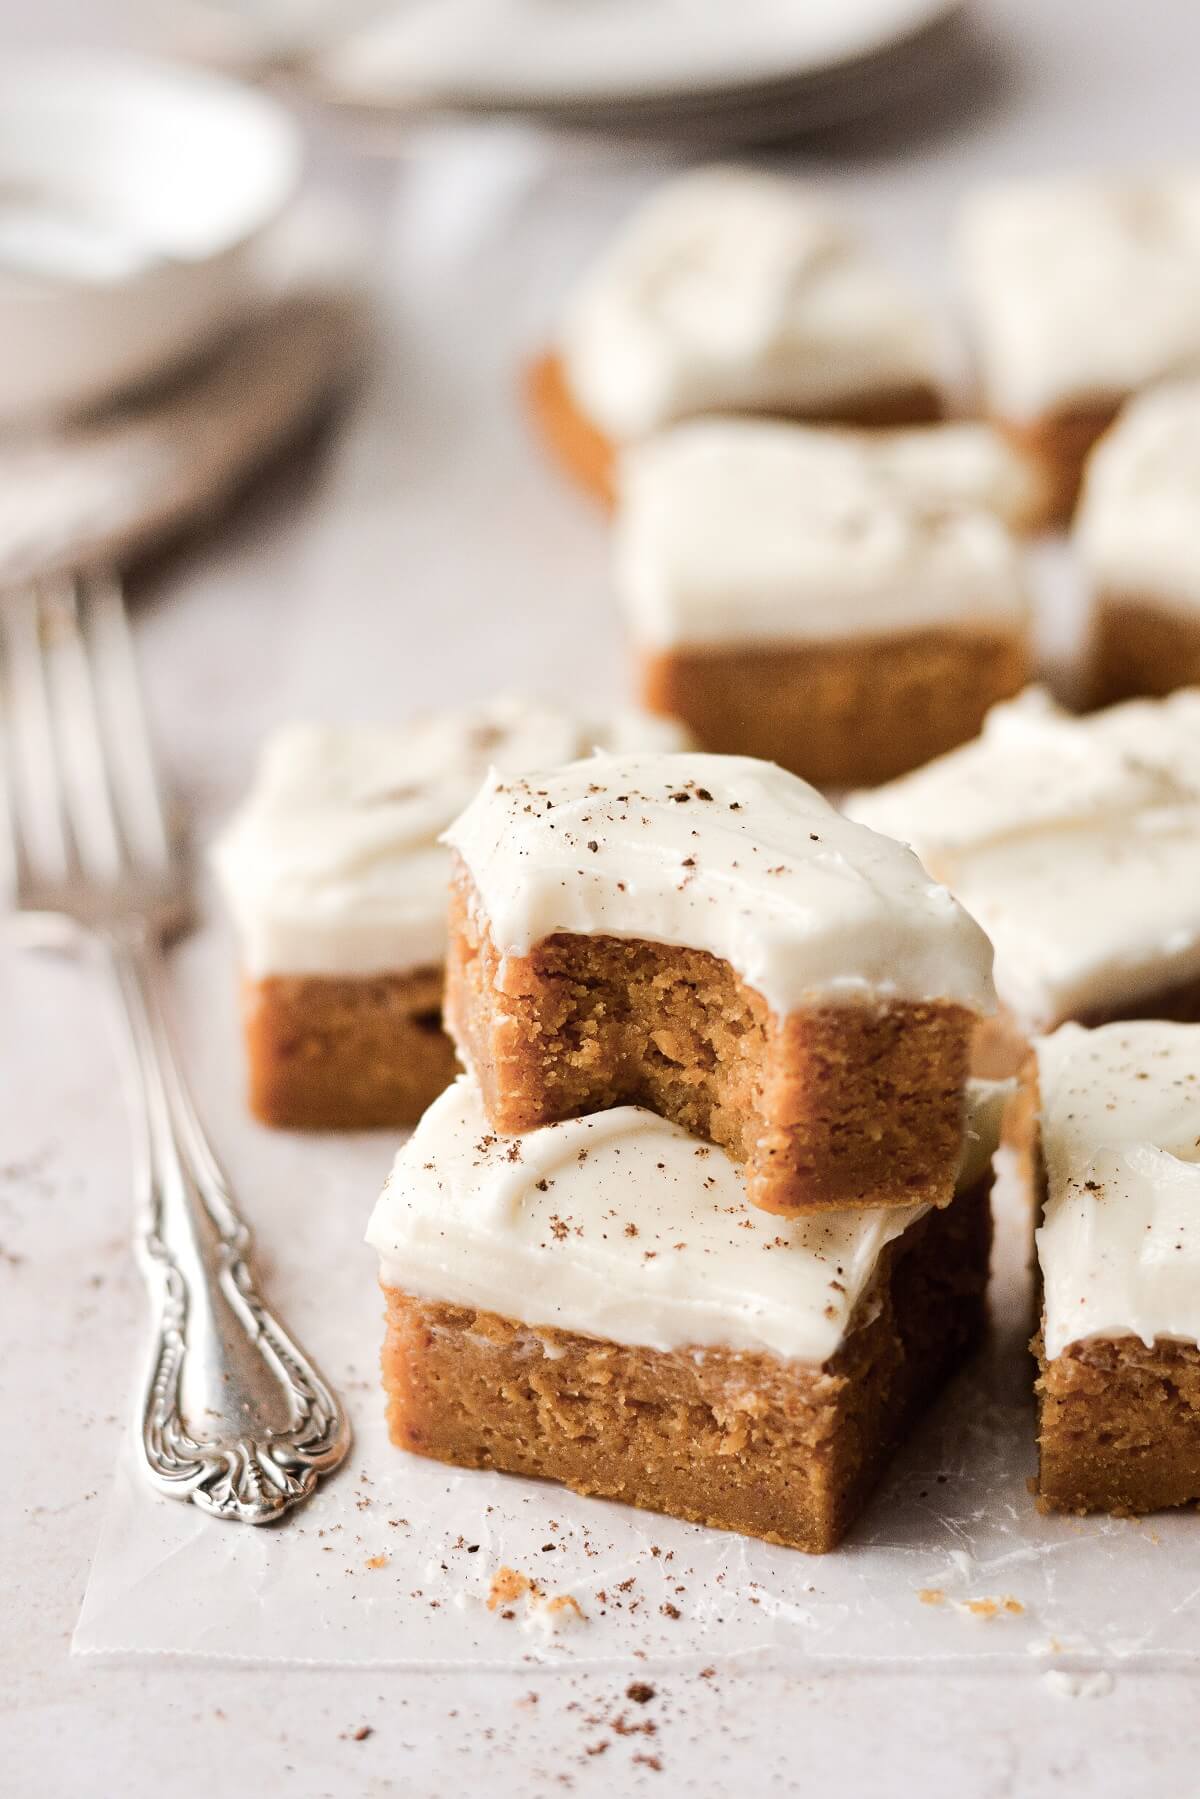 Pumpkin bars cut into squares, one with a bite taken.